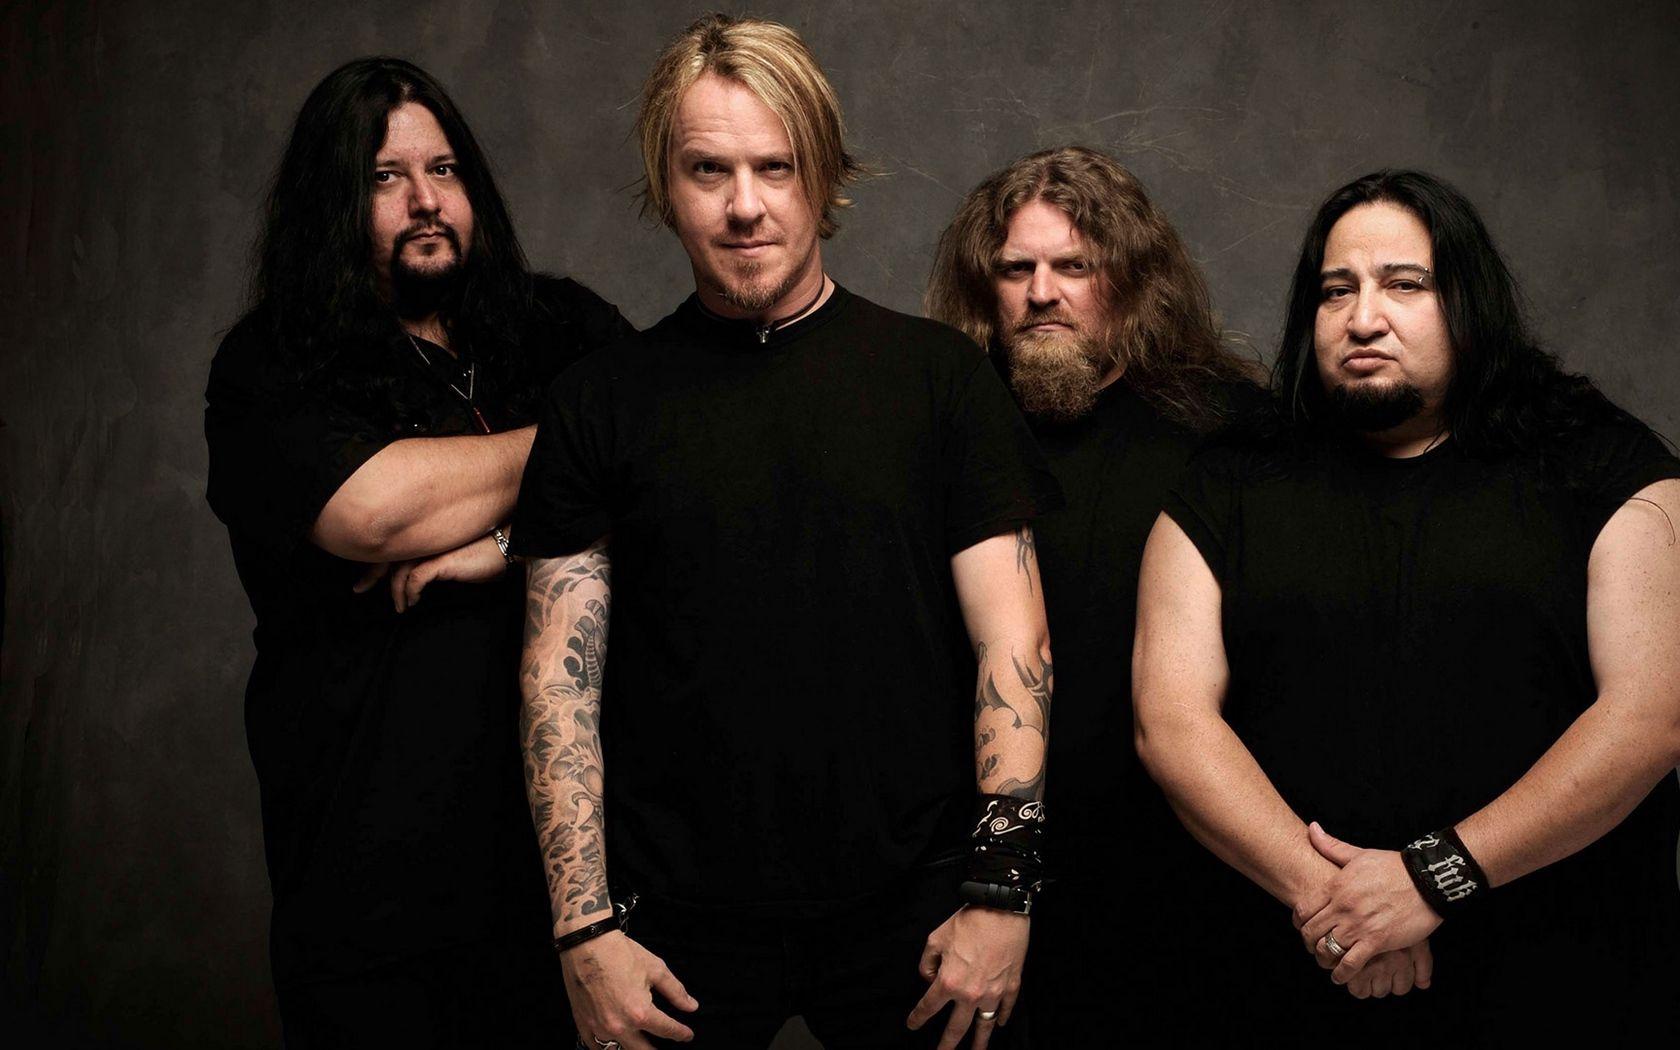 Download wallpaper 1680x1050 fear factory, band, members, tattoo, t